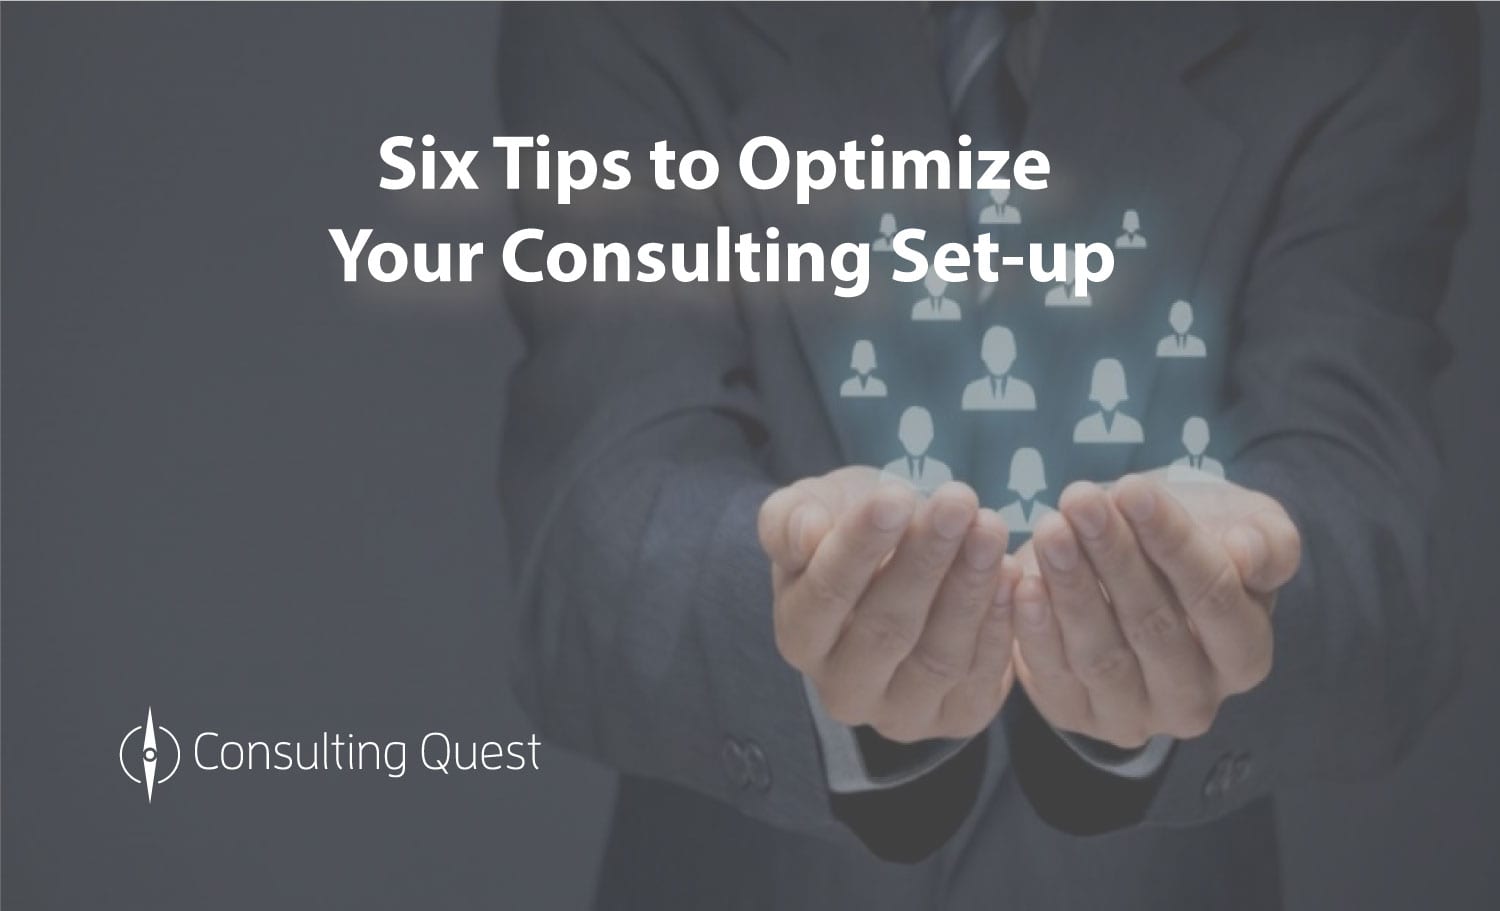 What Is the Right Size for Your Consulting Team?